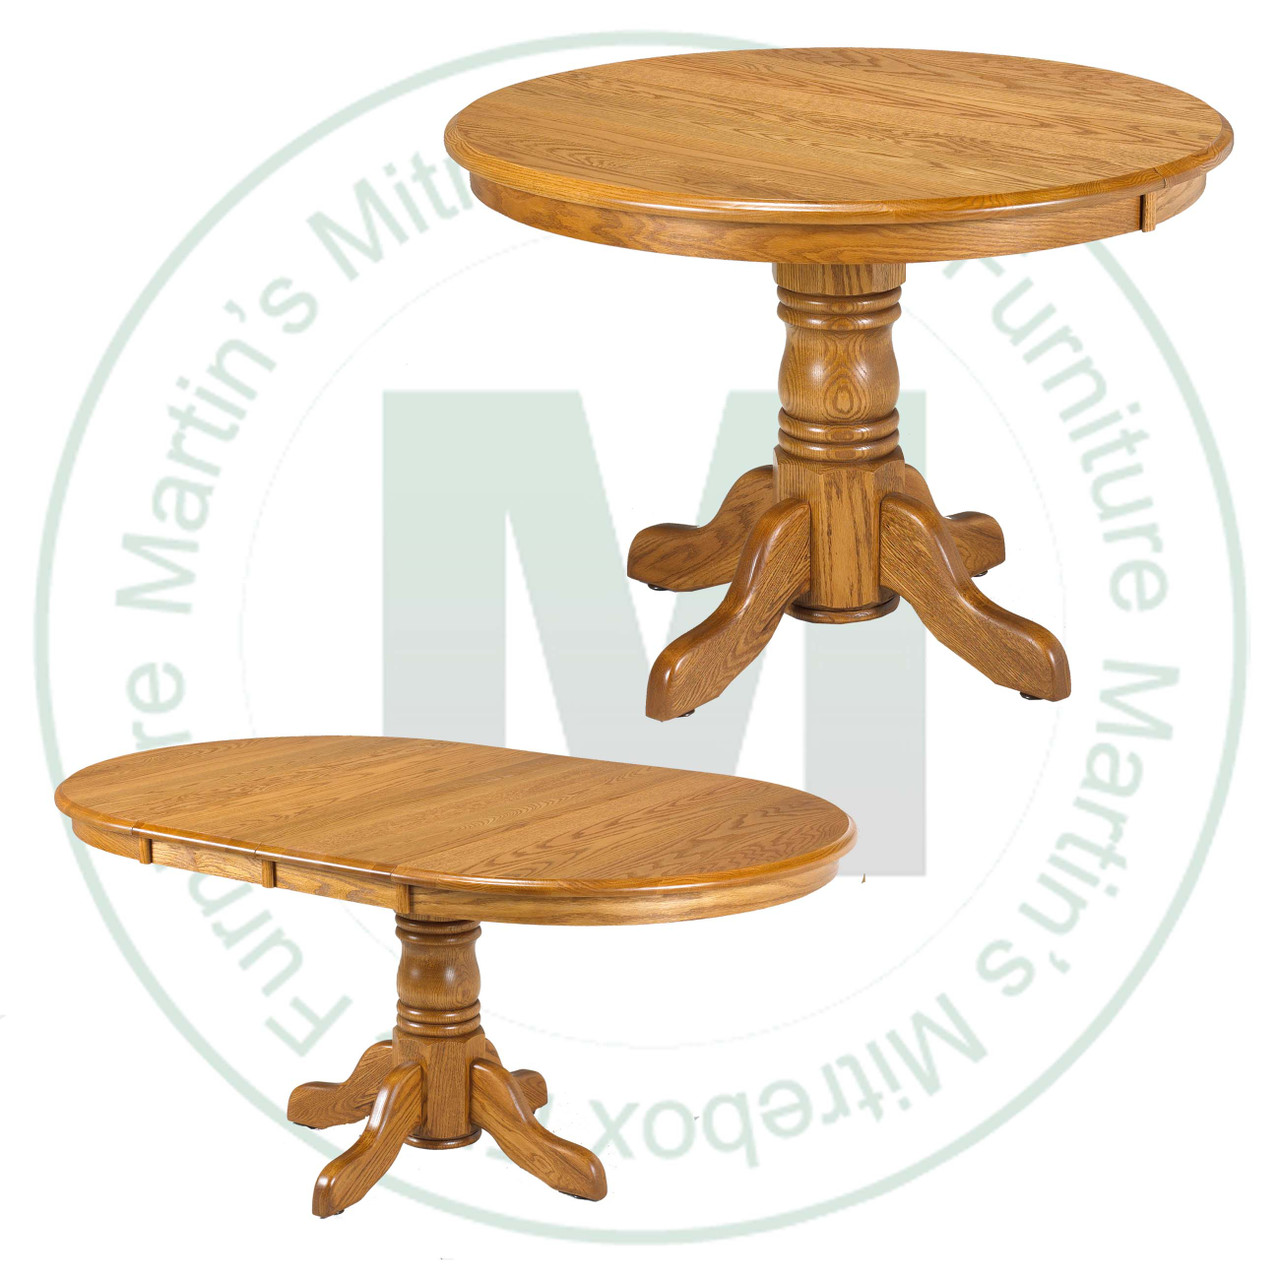 Wormy Maple Lancaster Collection Single Pedestal Table 60''D x 60''W x 30''H With 2 - 12'' Leaves. Table Has 1'' Thick Top